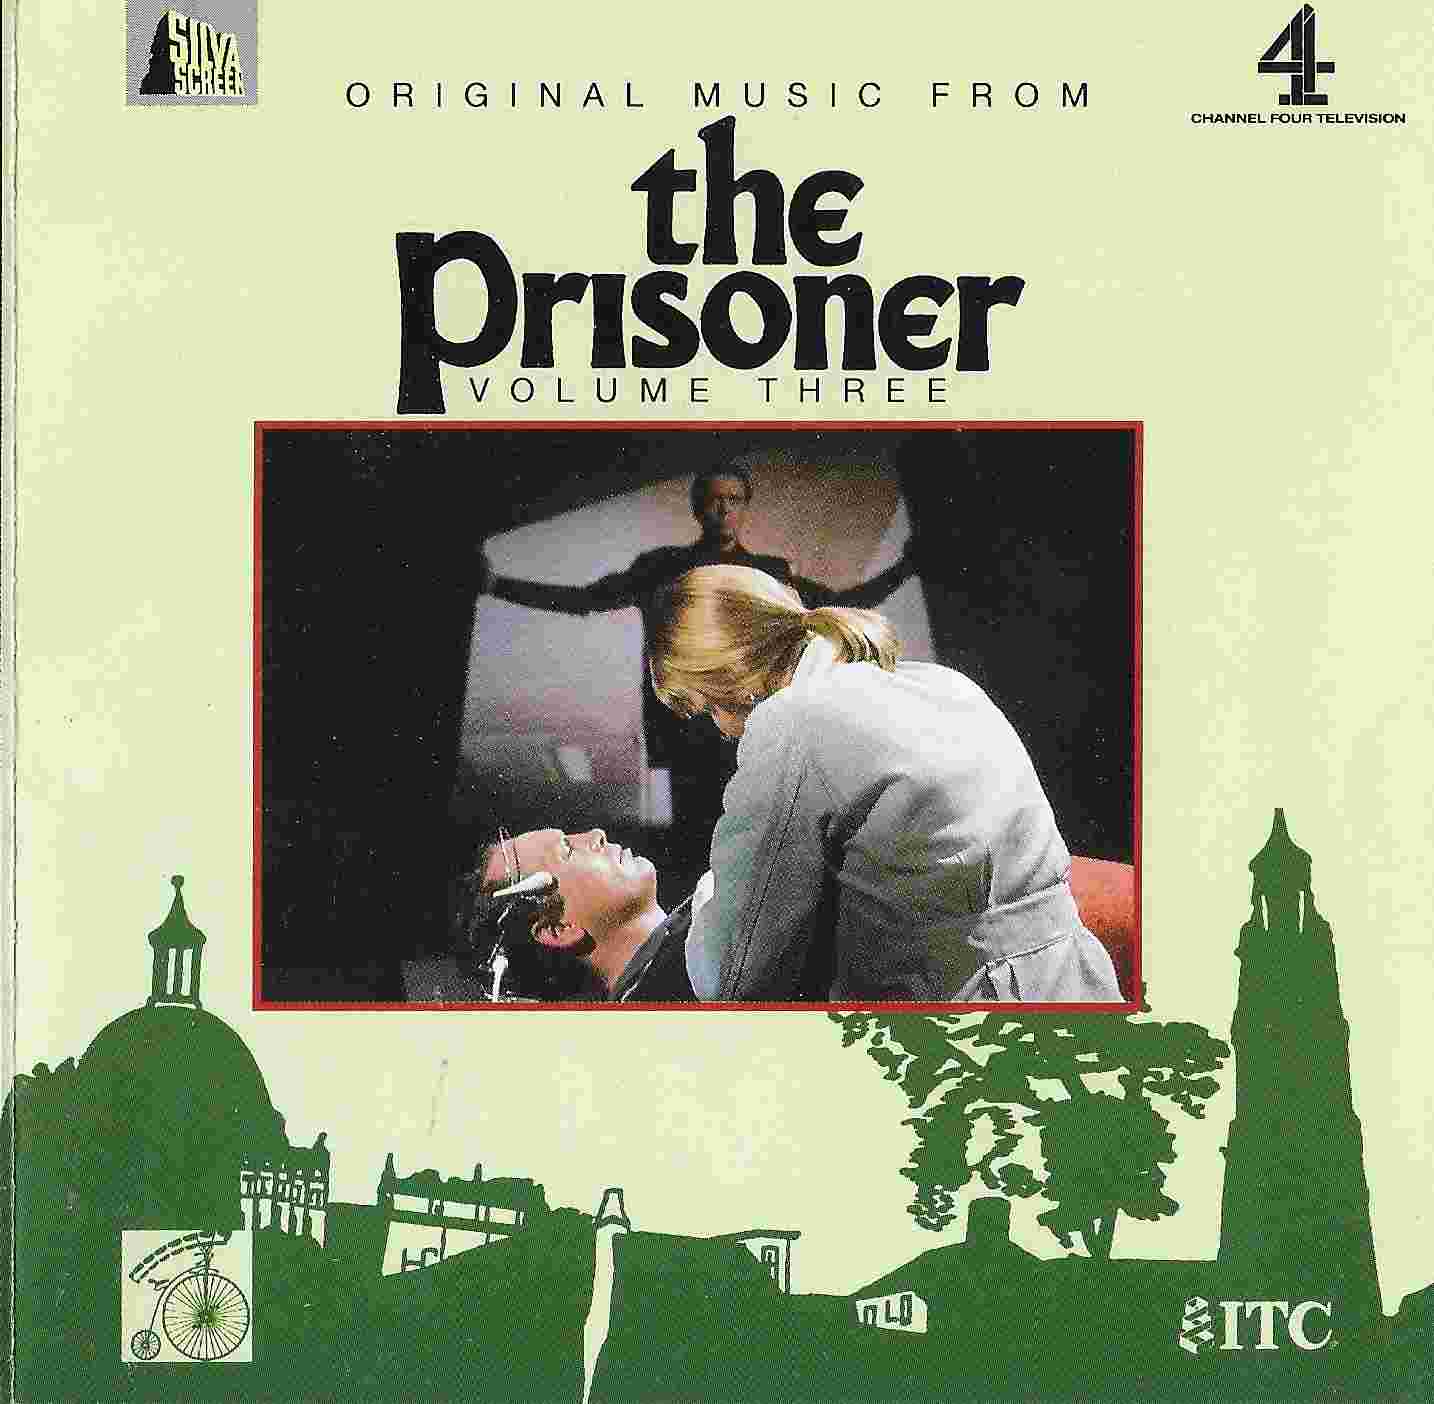 Picture of FILMCD 126 The prisoner - Volume 3 by artist Various from ITV, Channel 4 and Channel 5 cds library